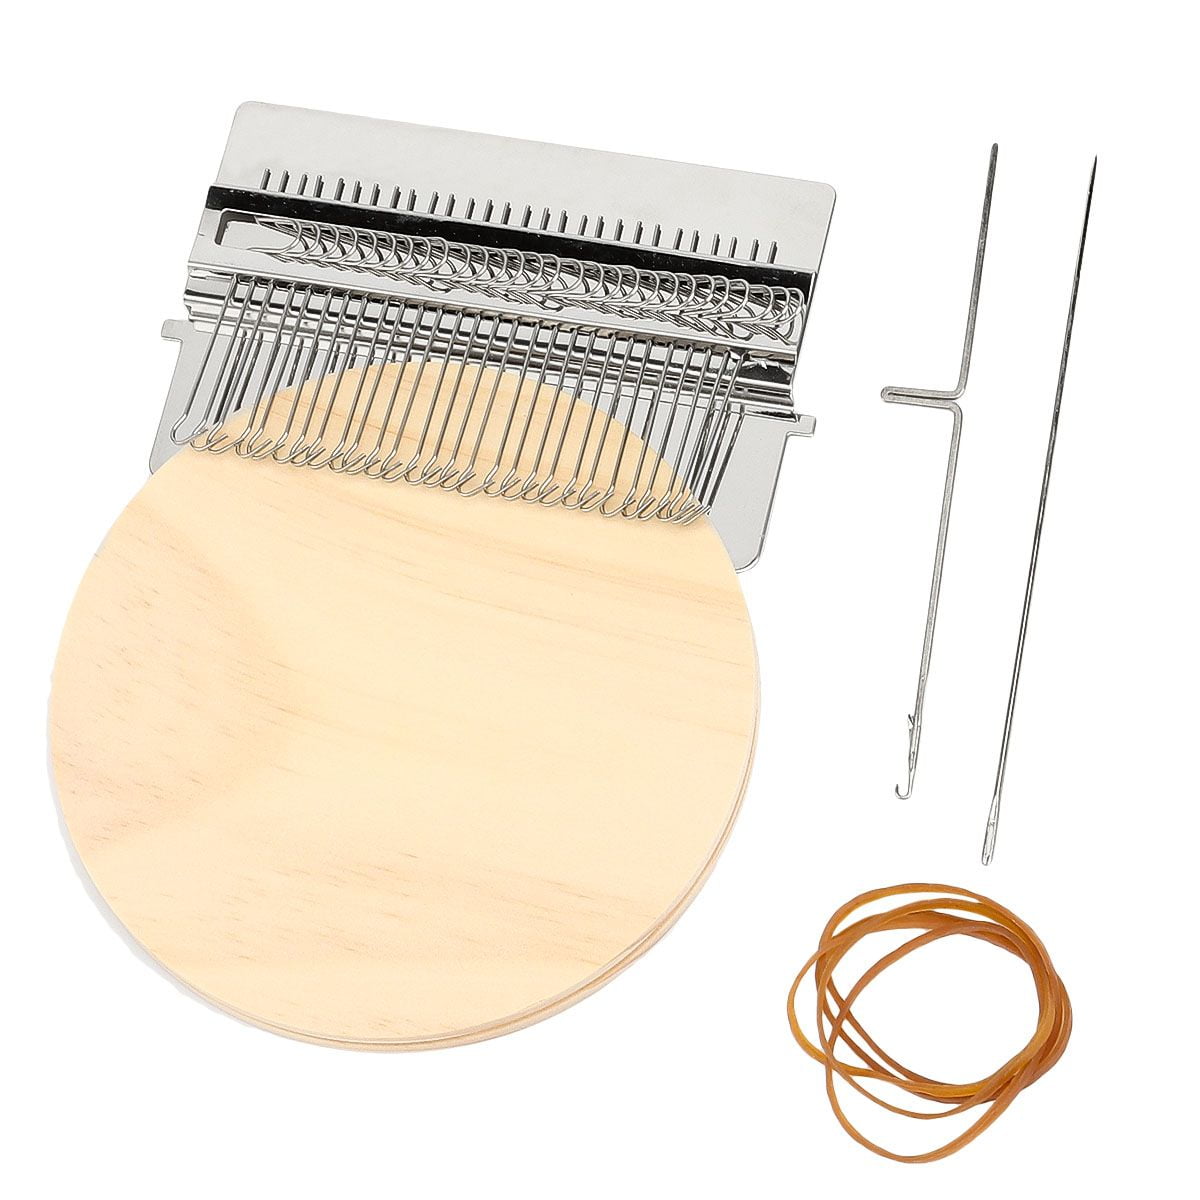 14 hooks Small Loom-Speedweve Type Weave Tool,Wooden Darning Tool,Creative DIY Weaving,Most Convenient Darning Loom for Beginners,Make beautiful stitches on clothes quickly and easily. 